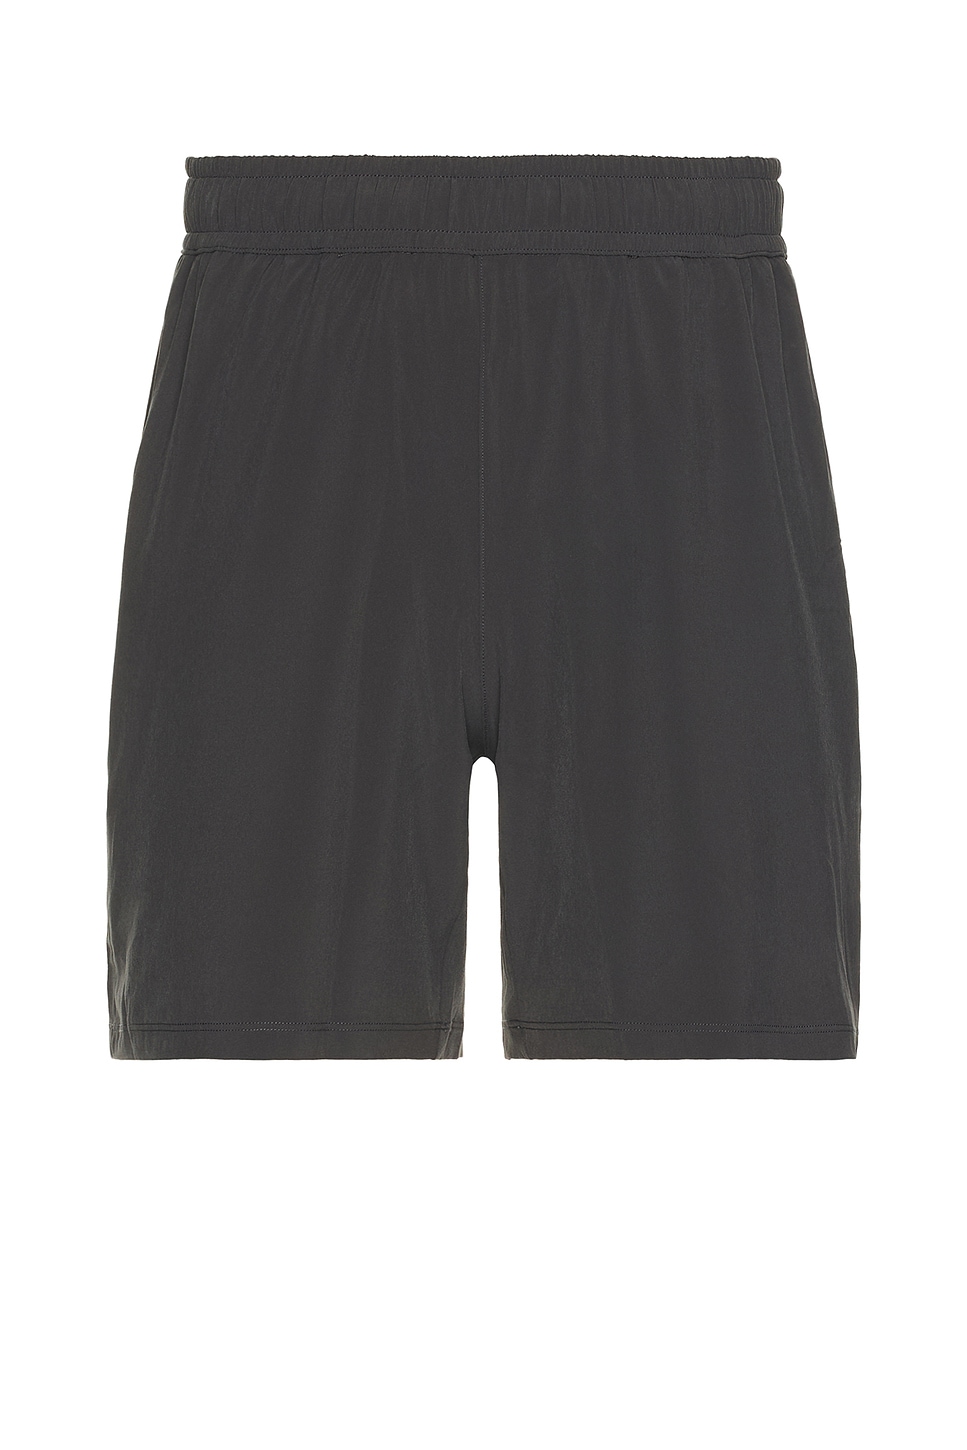 Pivotal Performance Short Unlined in Grey